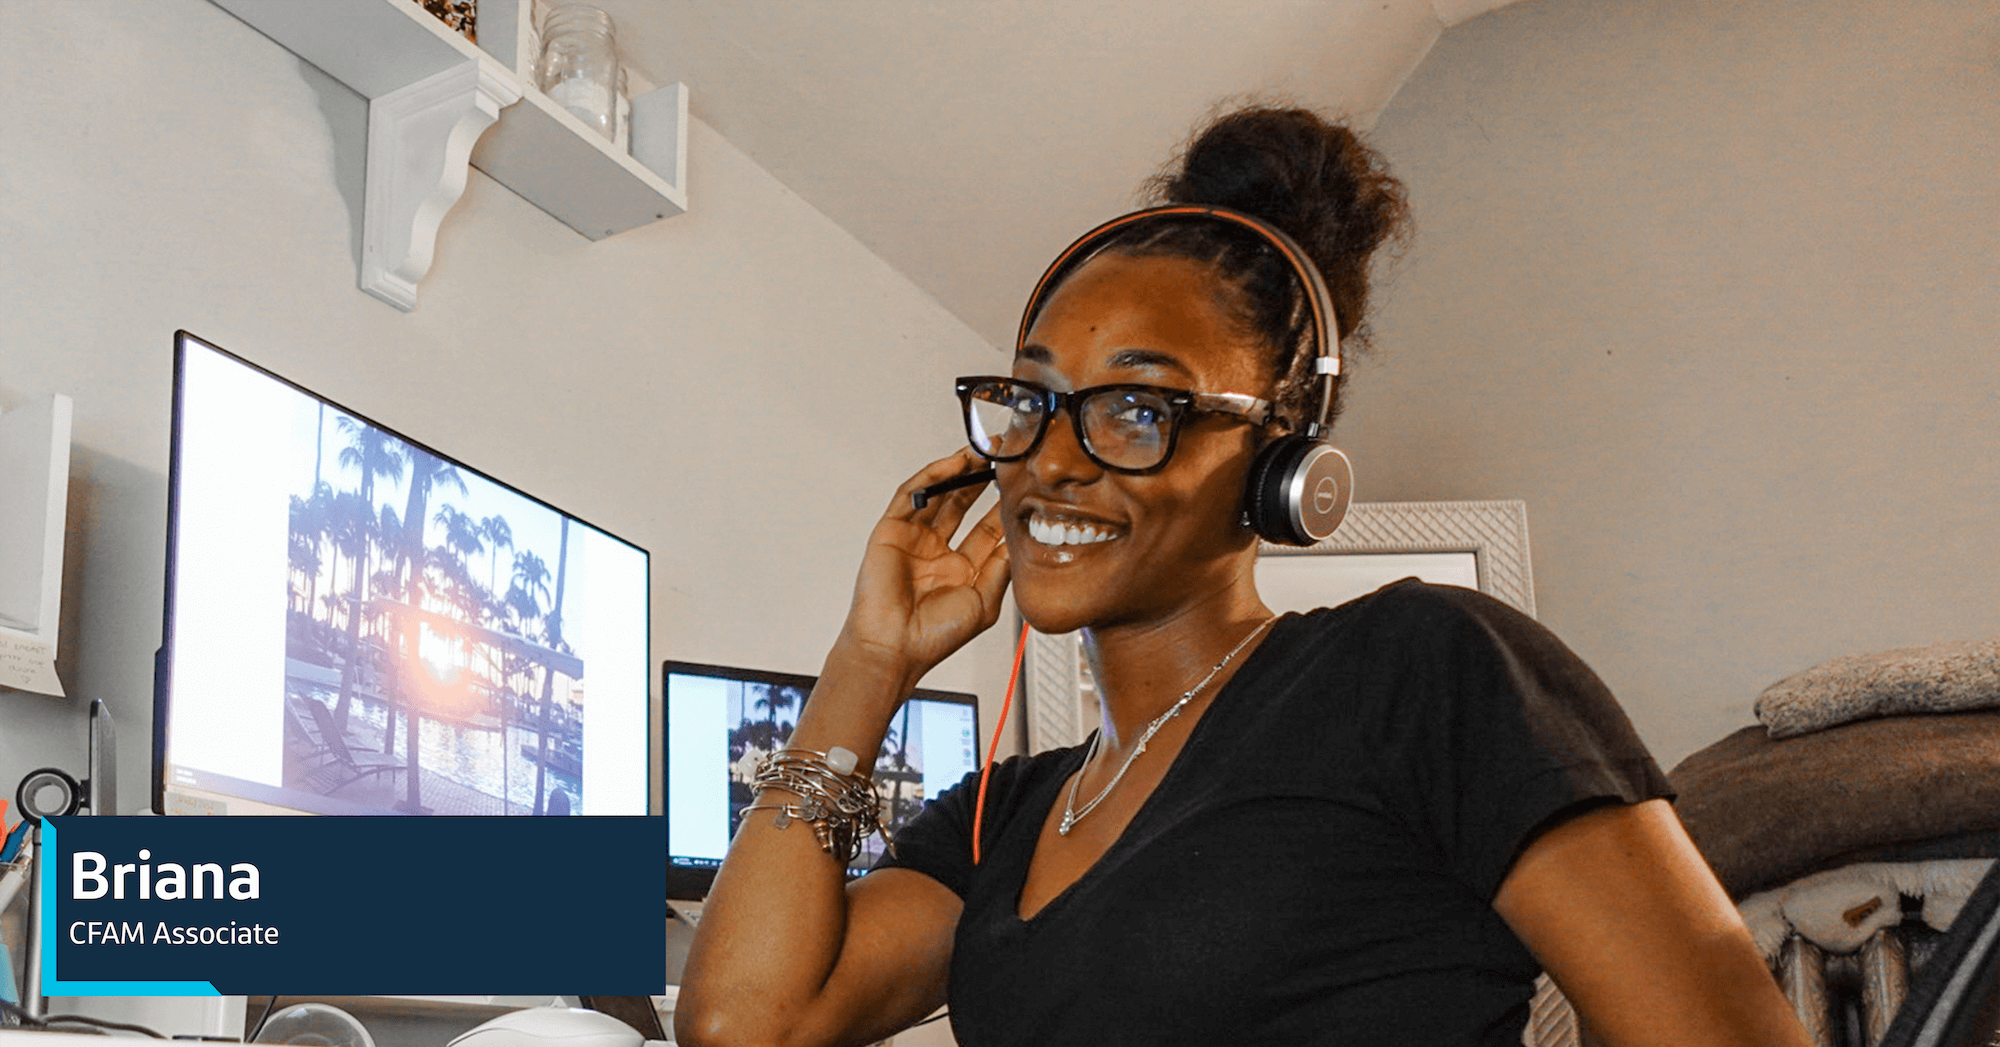 Briana, a Capital One CFAM associate, sits at her home office with a headset on, smiling